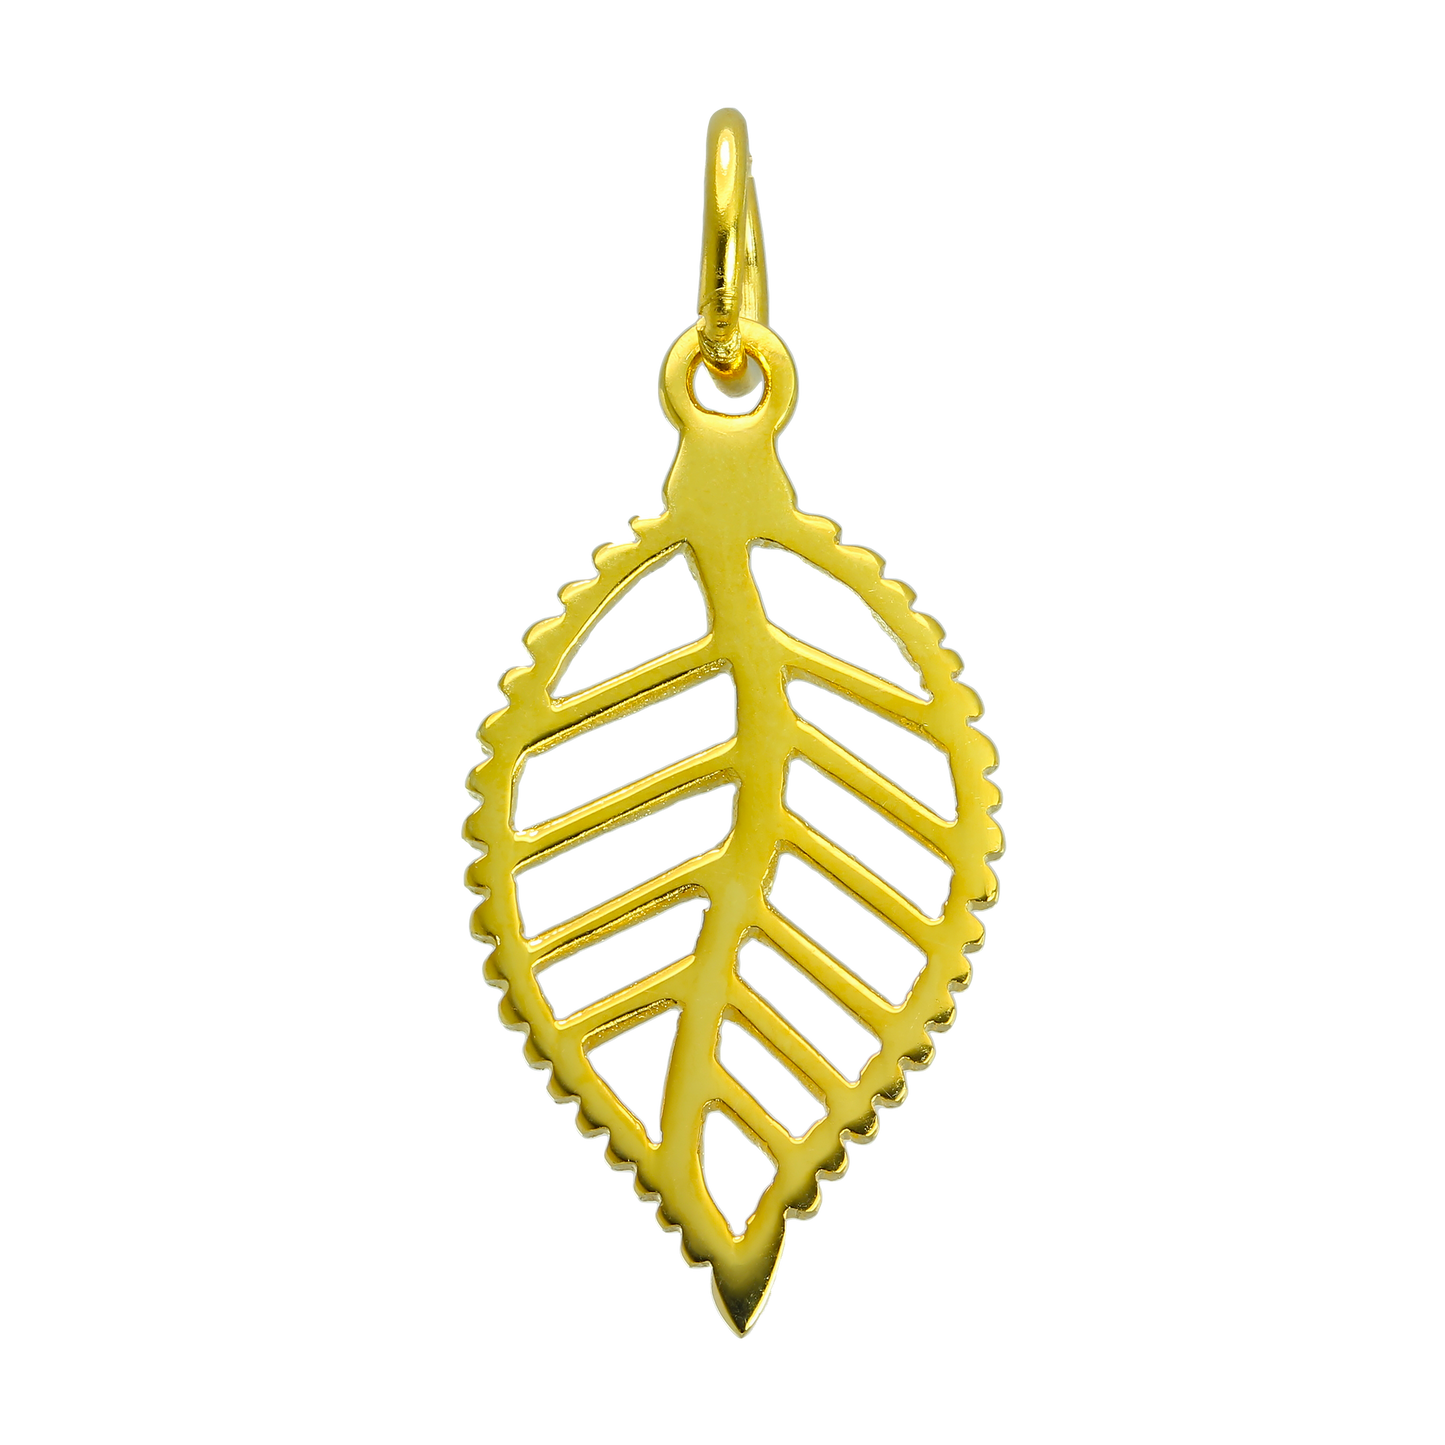 Gold Plated Sterling Silver Cut Out Leaf Charm